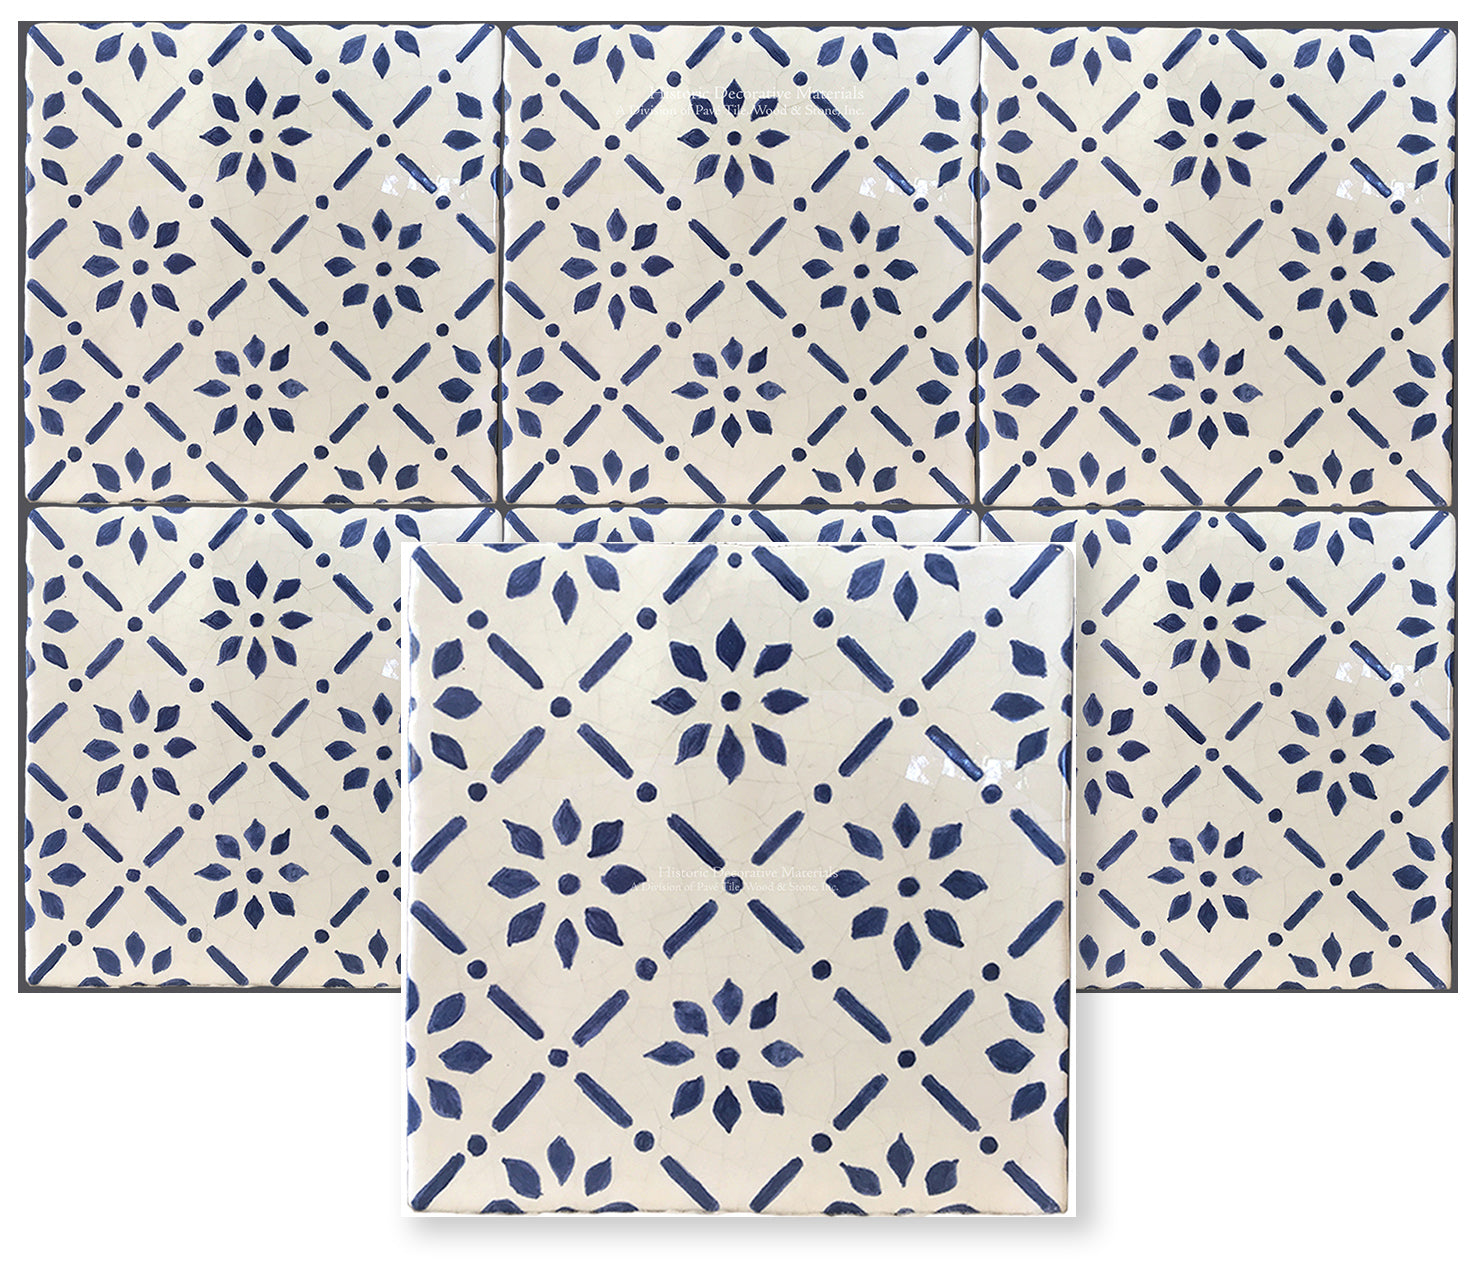 Blue and White Hand painted decorative wall tile like the Monet tiles found in Giverny, France are for kitchen backsplash, fireplace surround and bathroom walls that interior designers choose for traditional and historic interior design styles